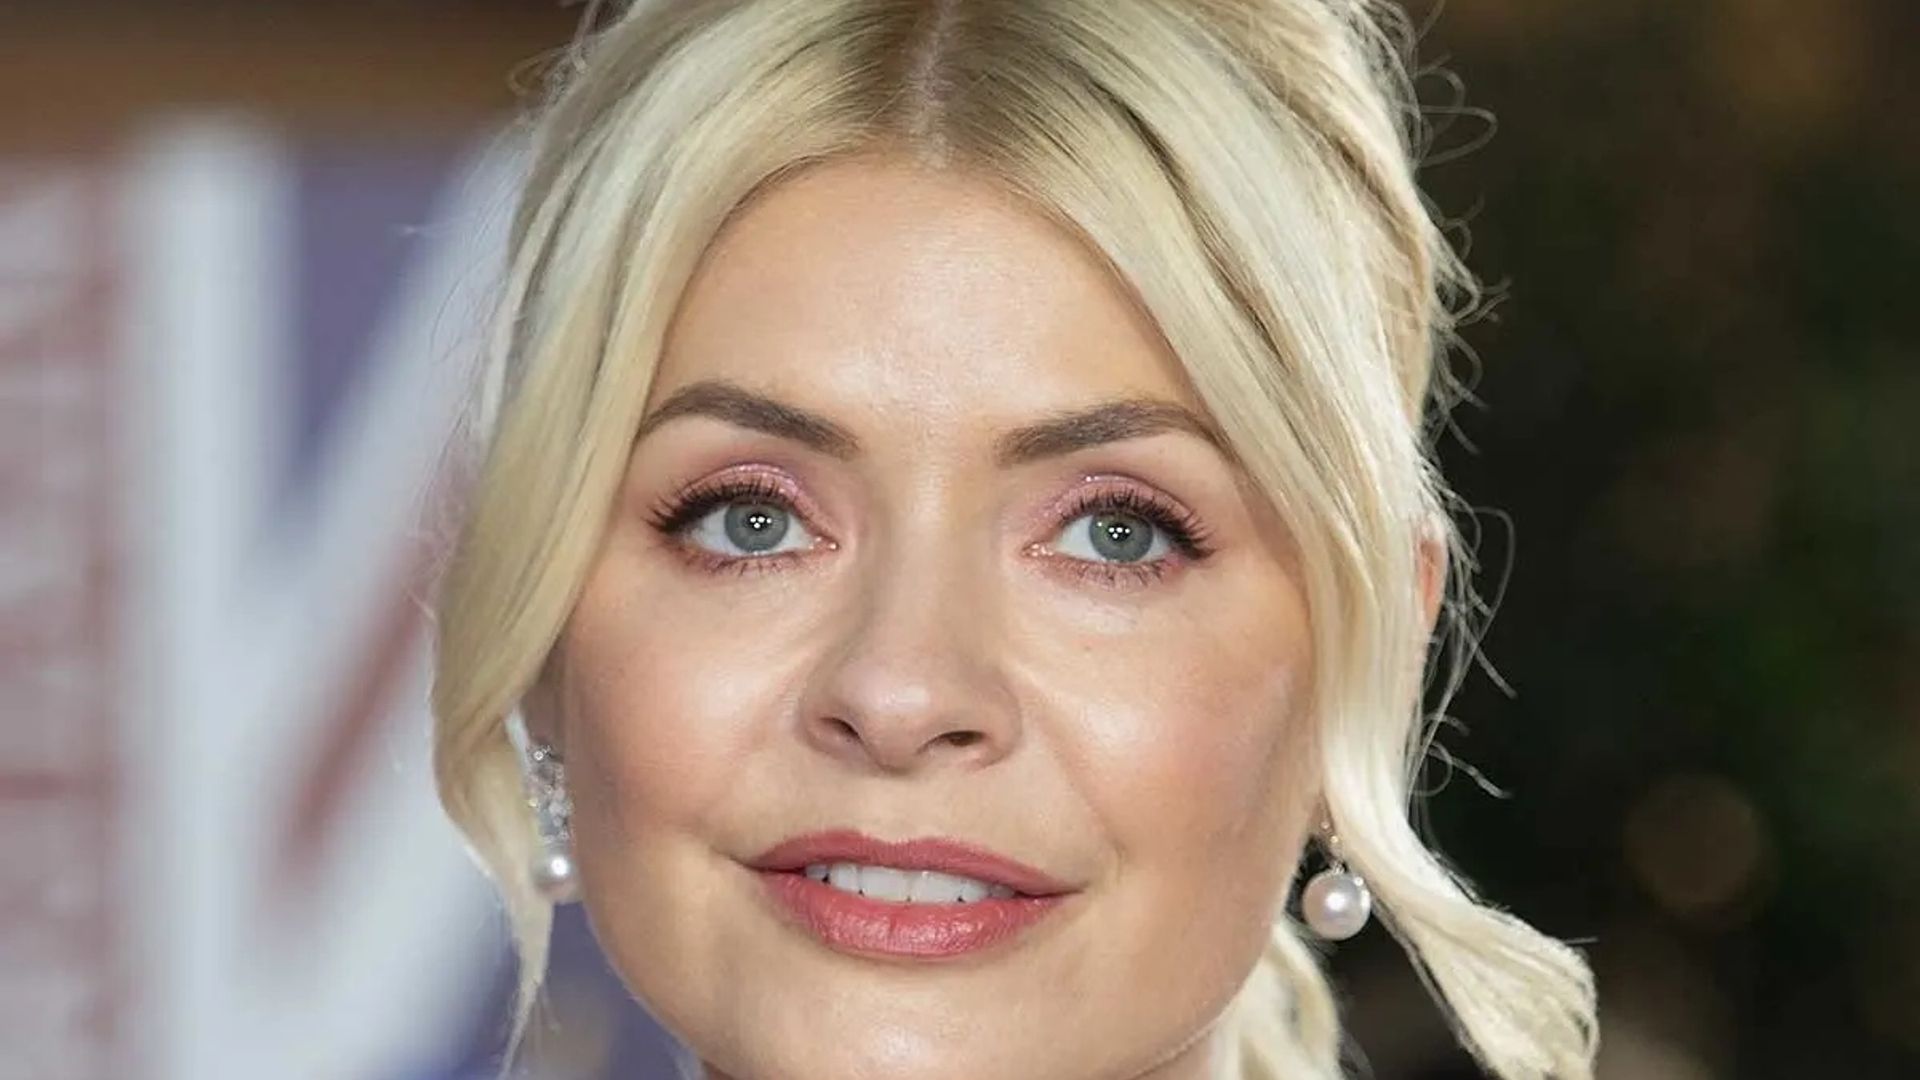 Holly Willoughby looks glowing in wedding dress of dreams you HAVE to see